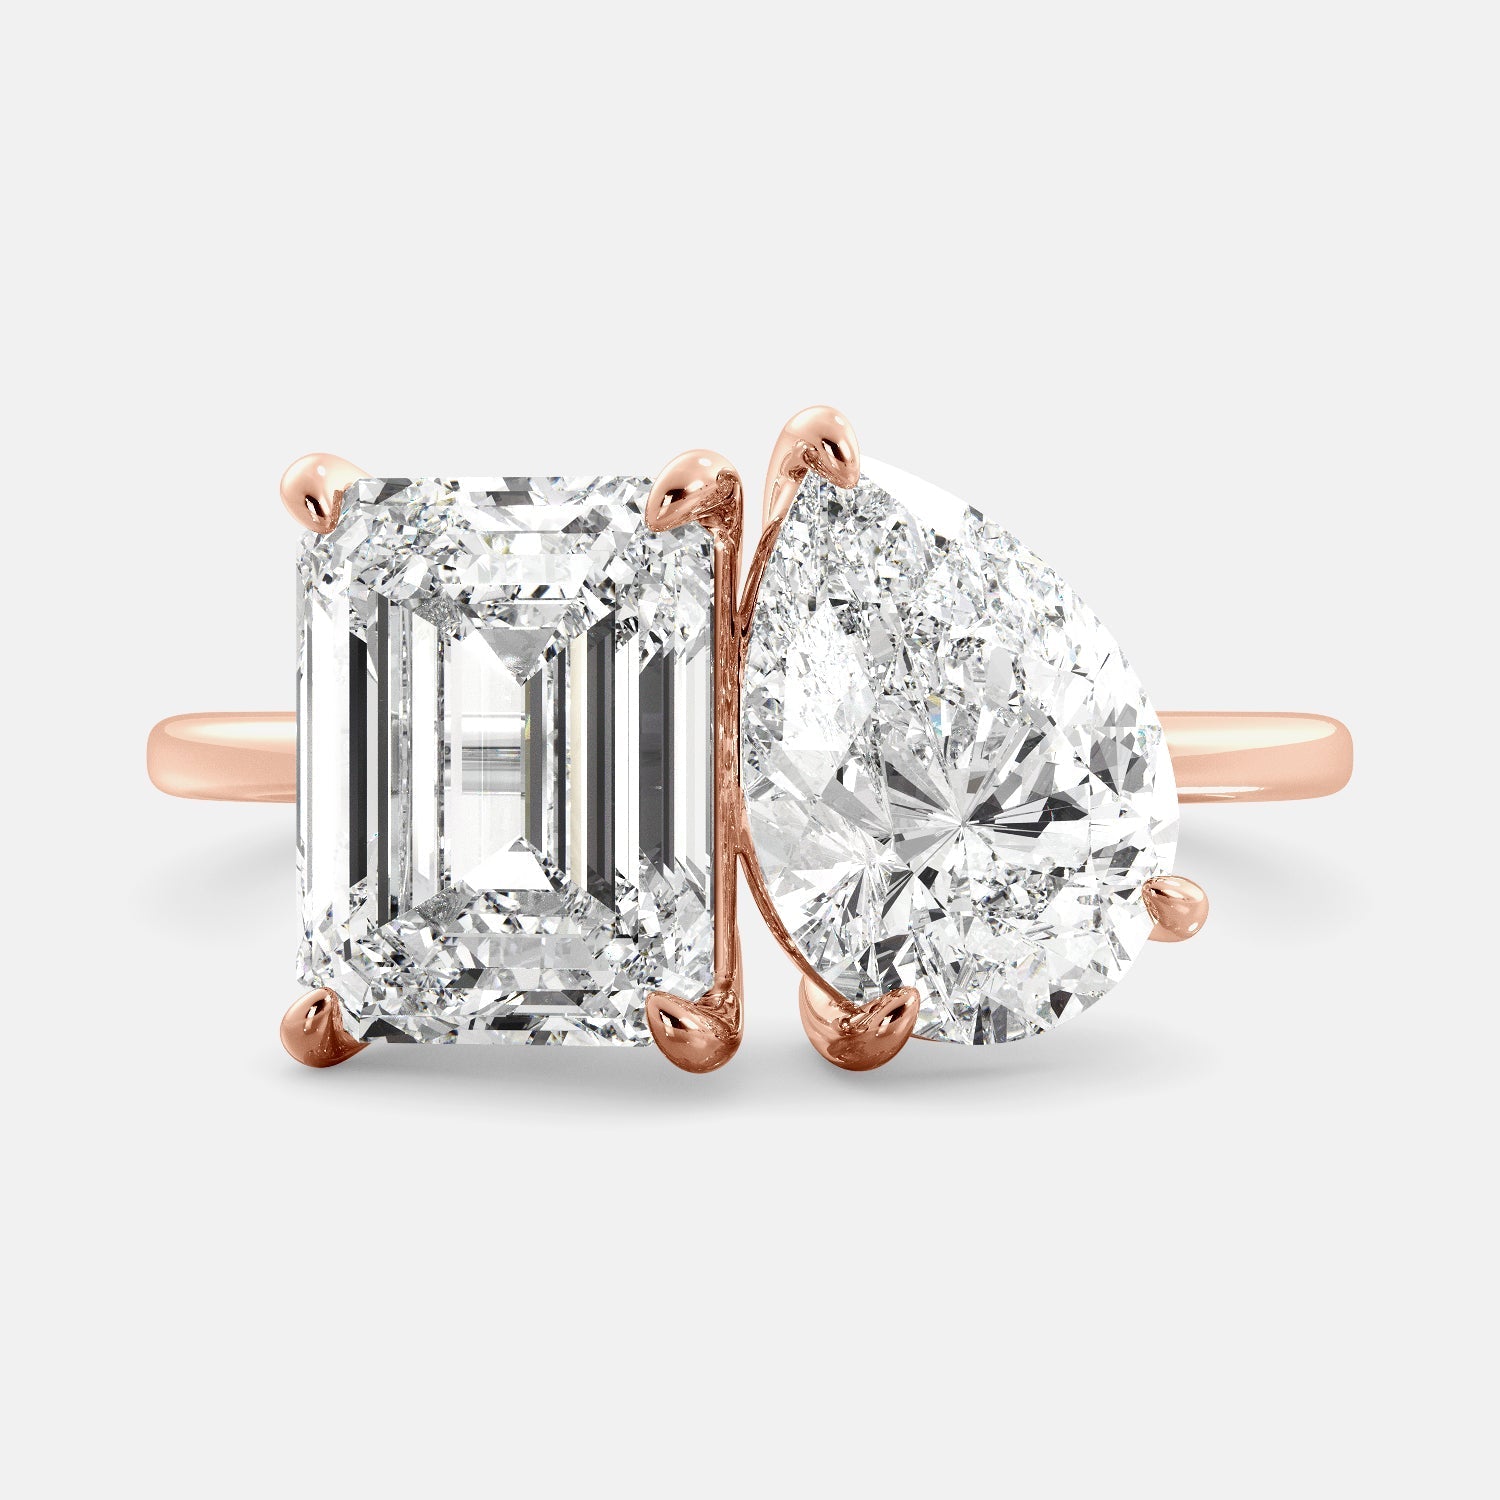 Lab-grown Toi-et-Moi Diamond Ring with two Diamonds, Emerald and Pear Diamond cut, 4-carat, rose gold 14K